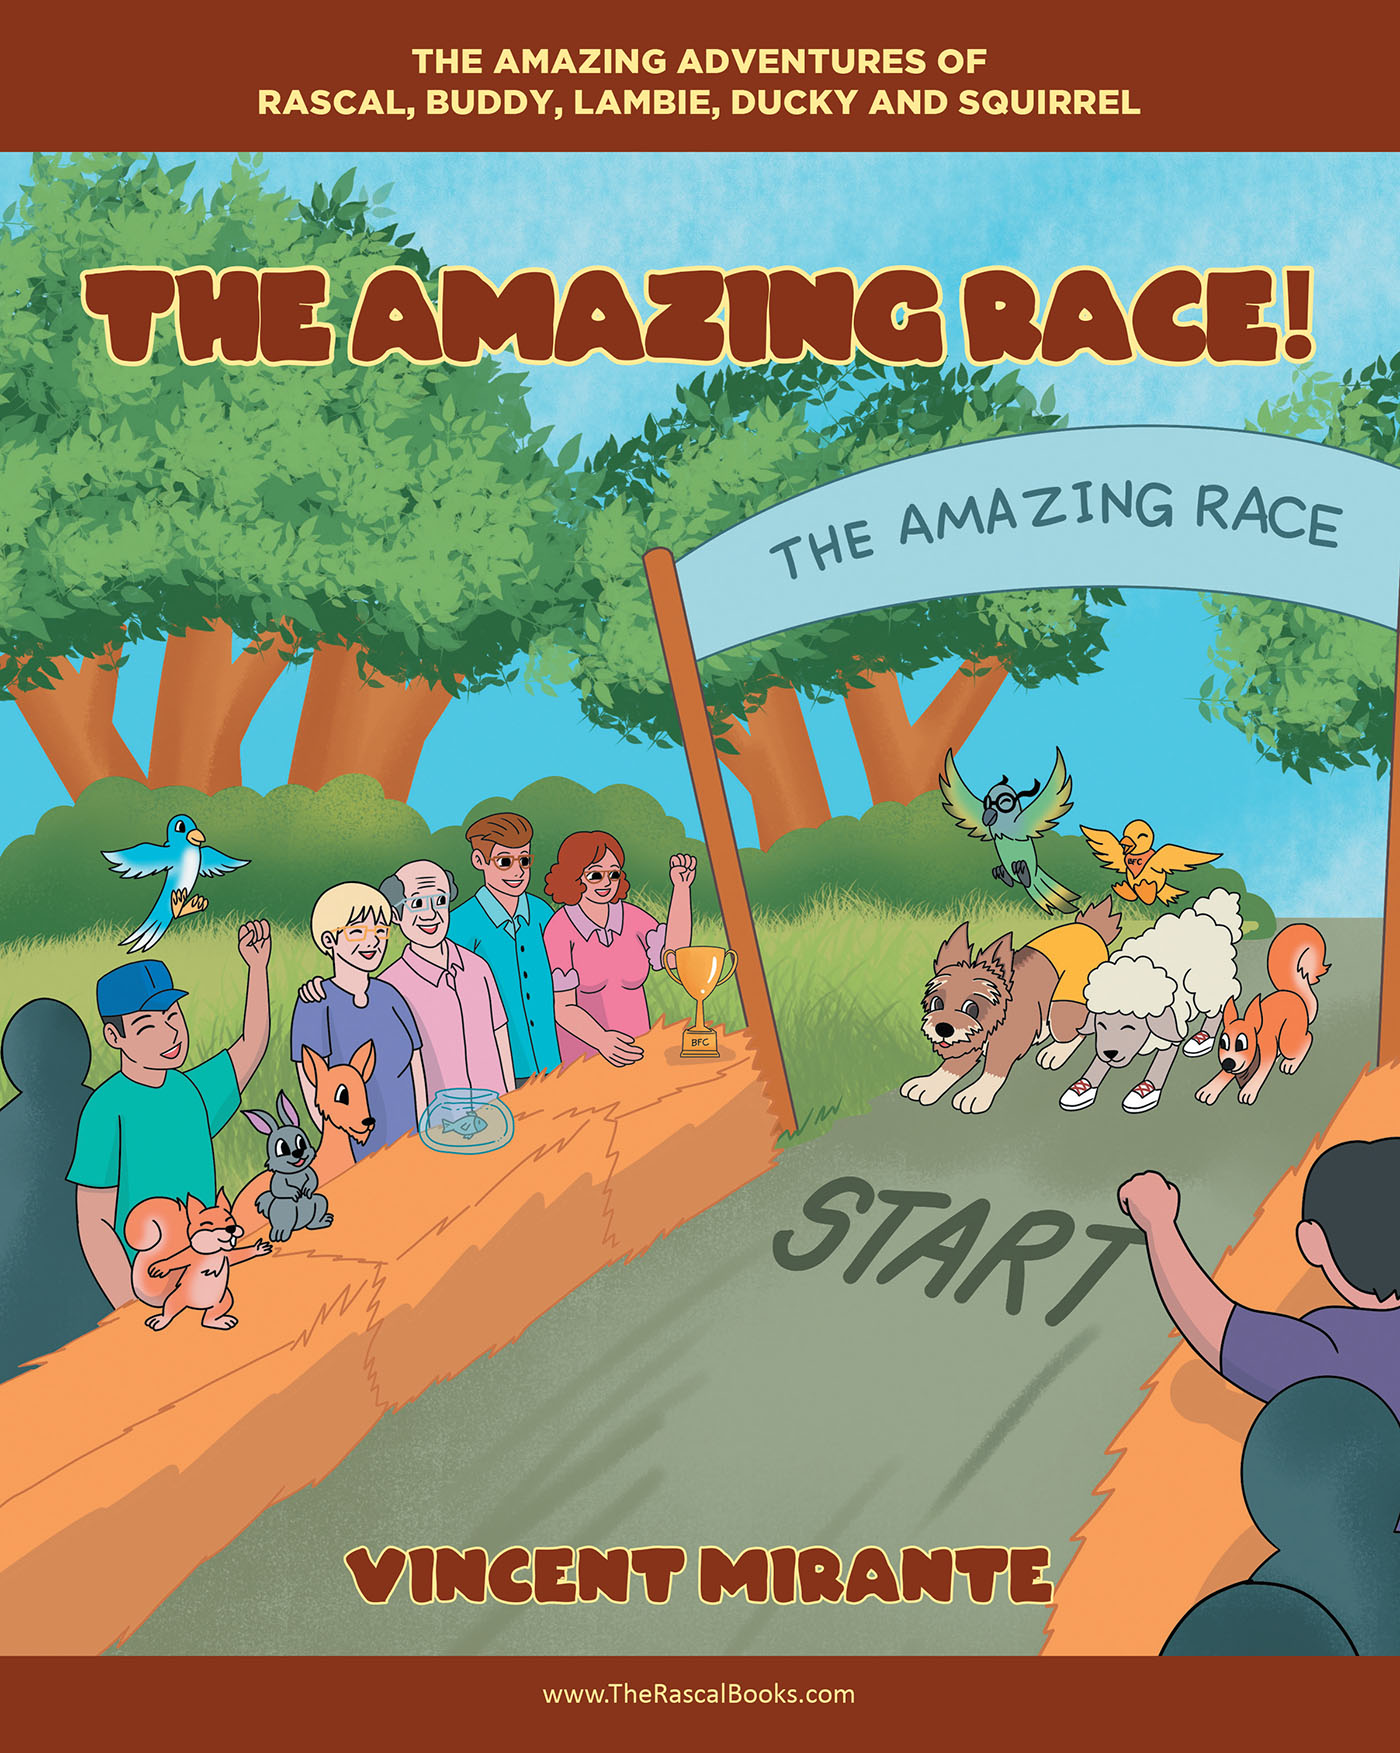 The Amazing Race! Cover Image